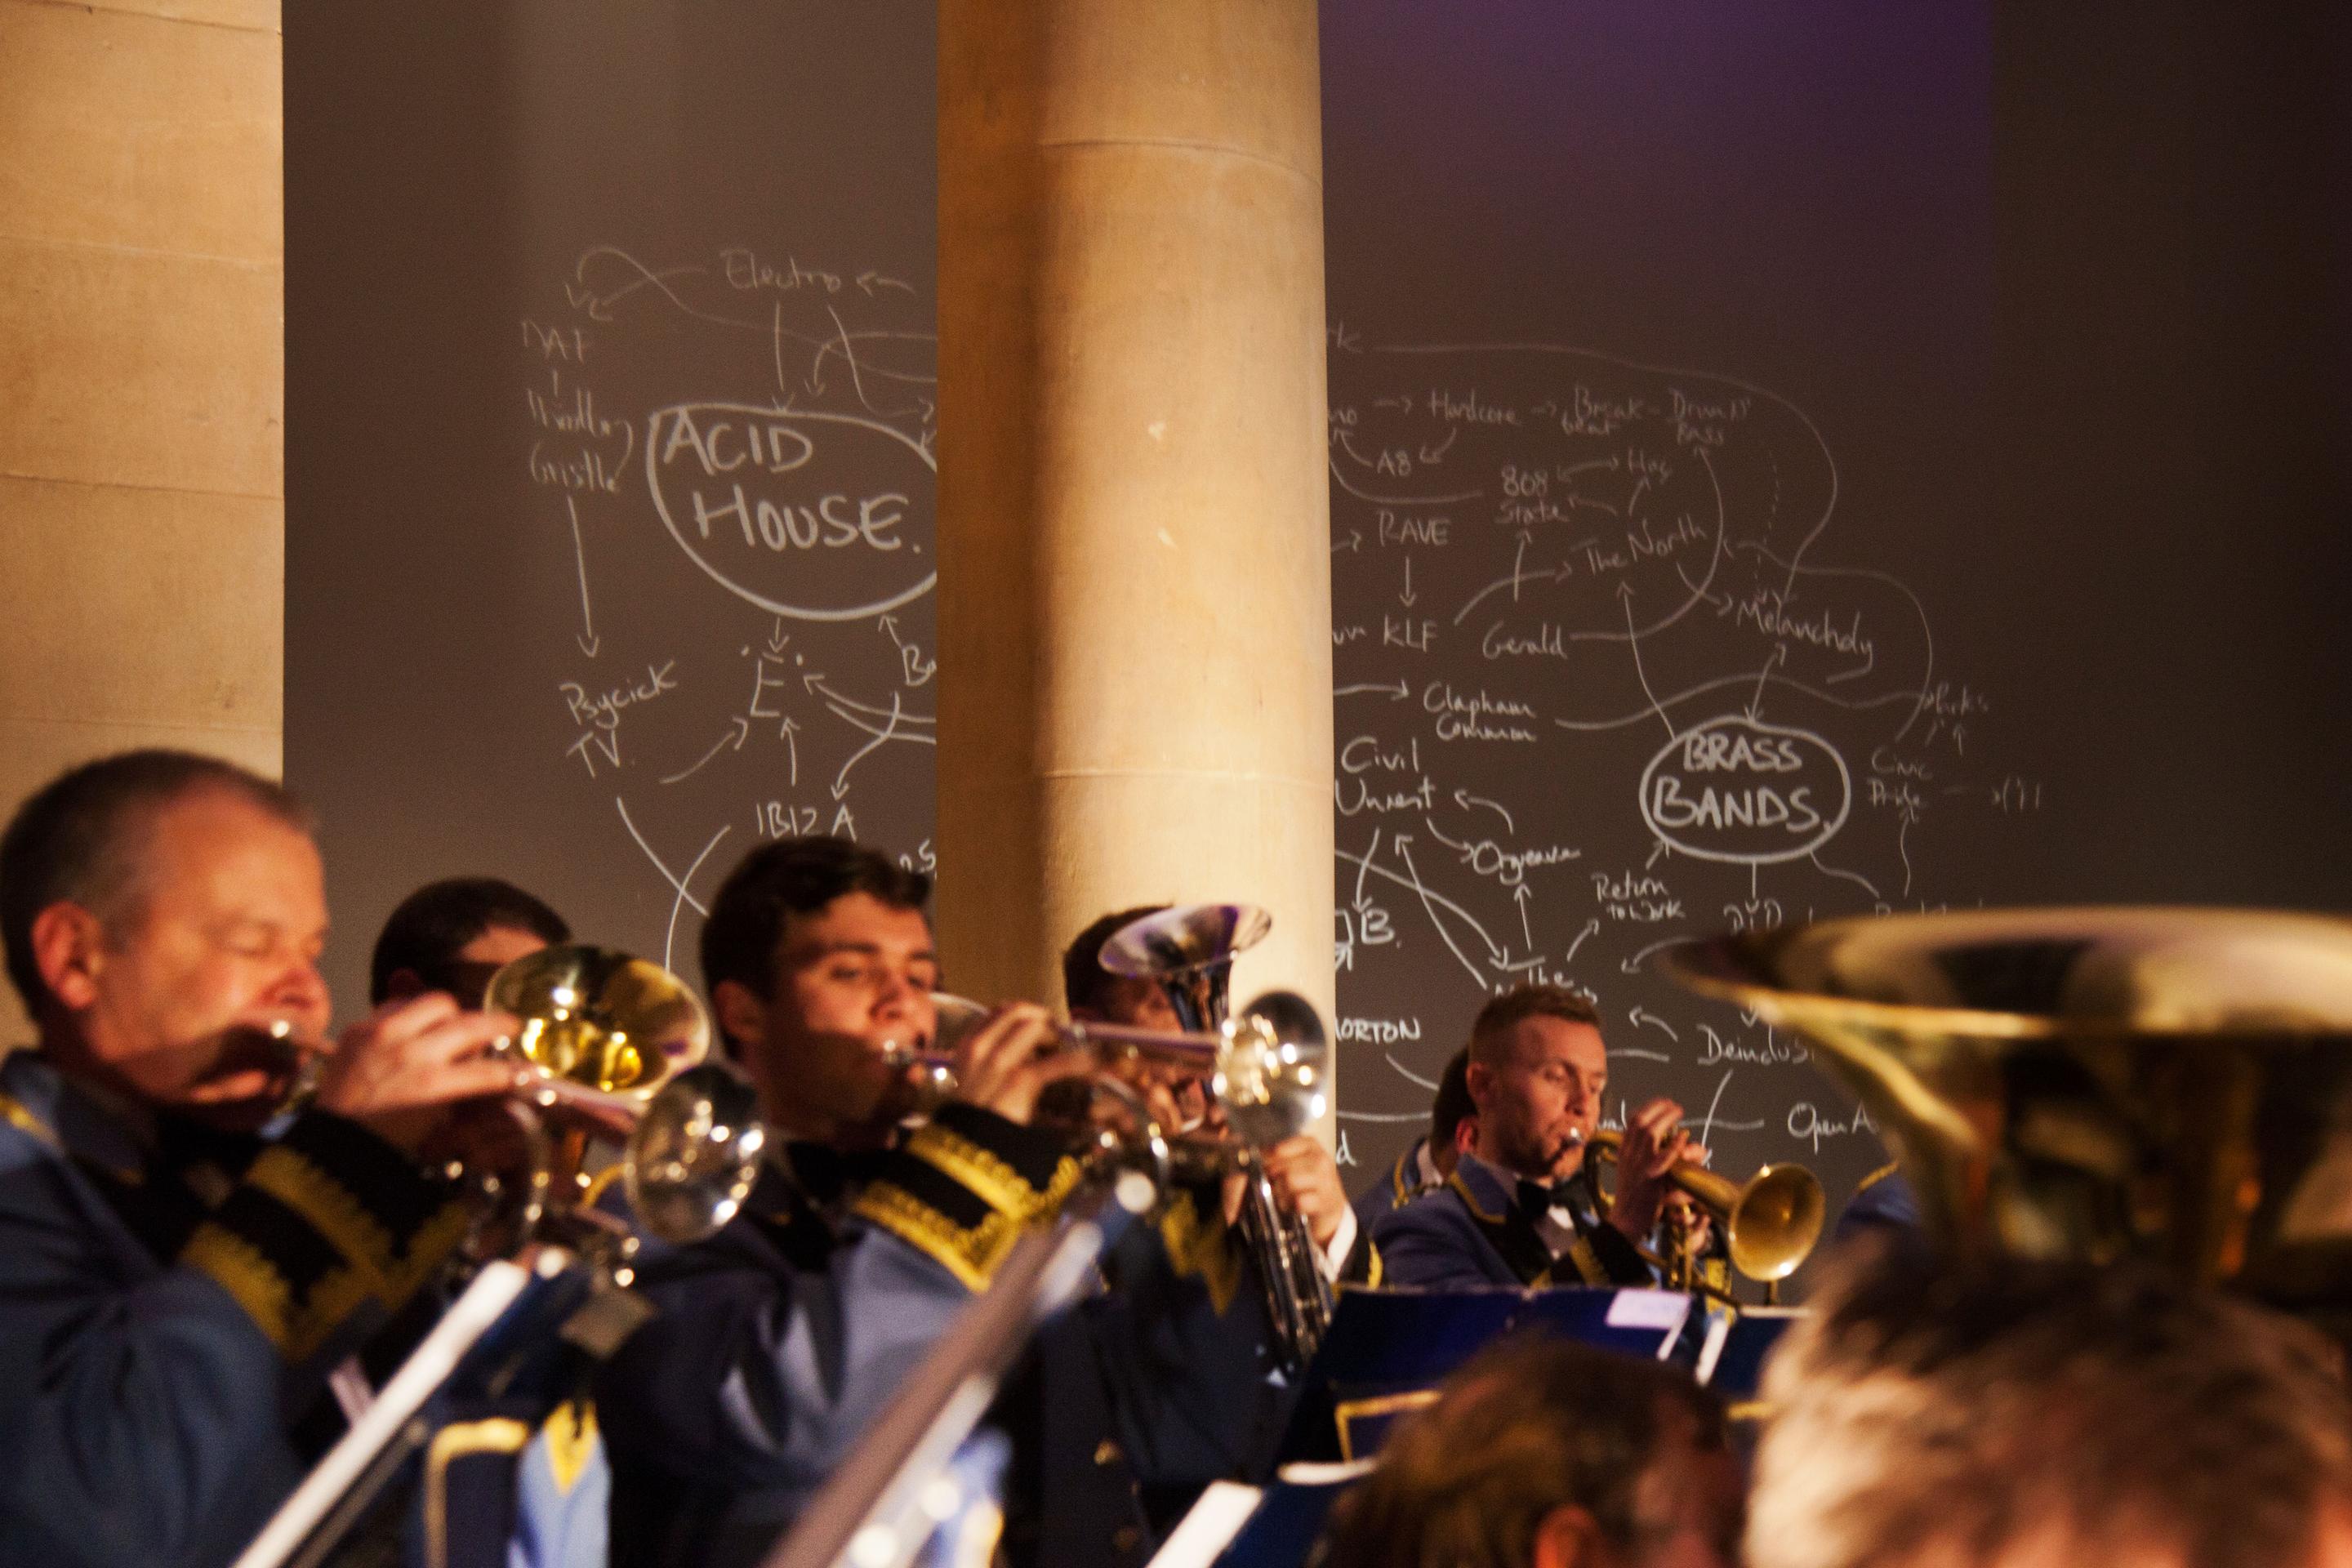 A brass band in uniform and playing trumpets and tubas performs in front of a mind map that connects acid house and brass band music.